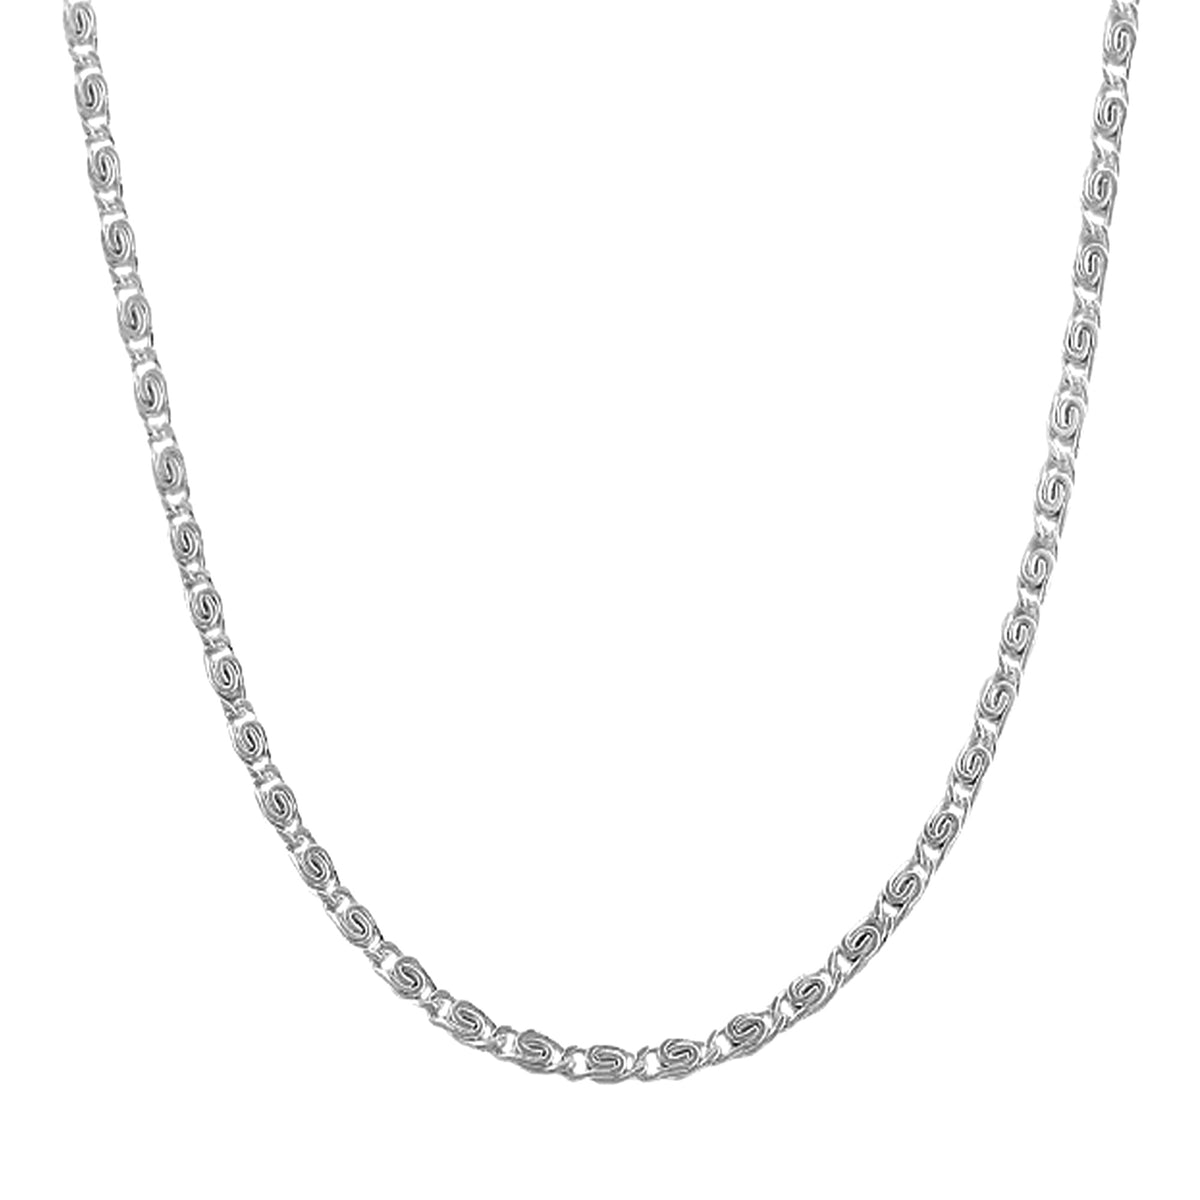 10K White Gold Tigers Eye Chain Necklace, 2.3mm, 18" fine designer jewelry for men and women